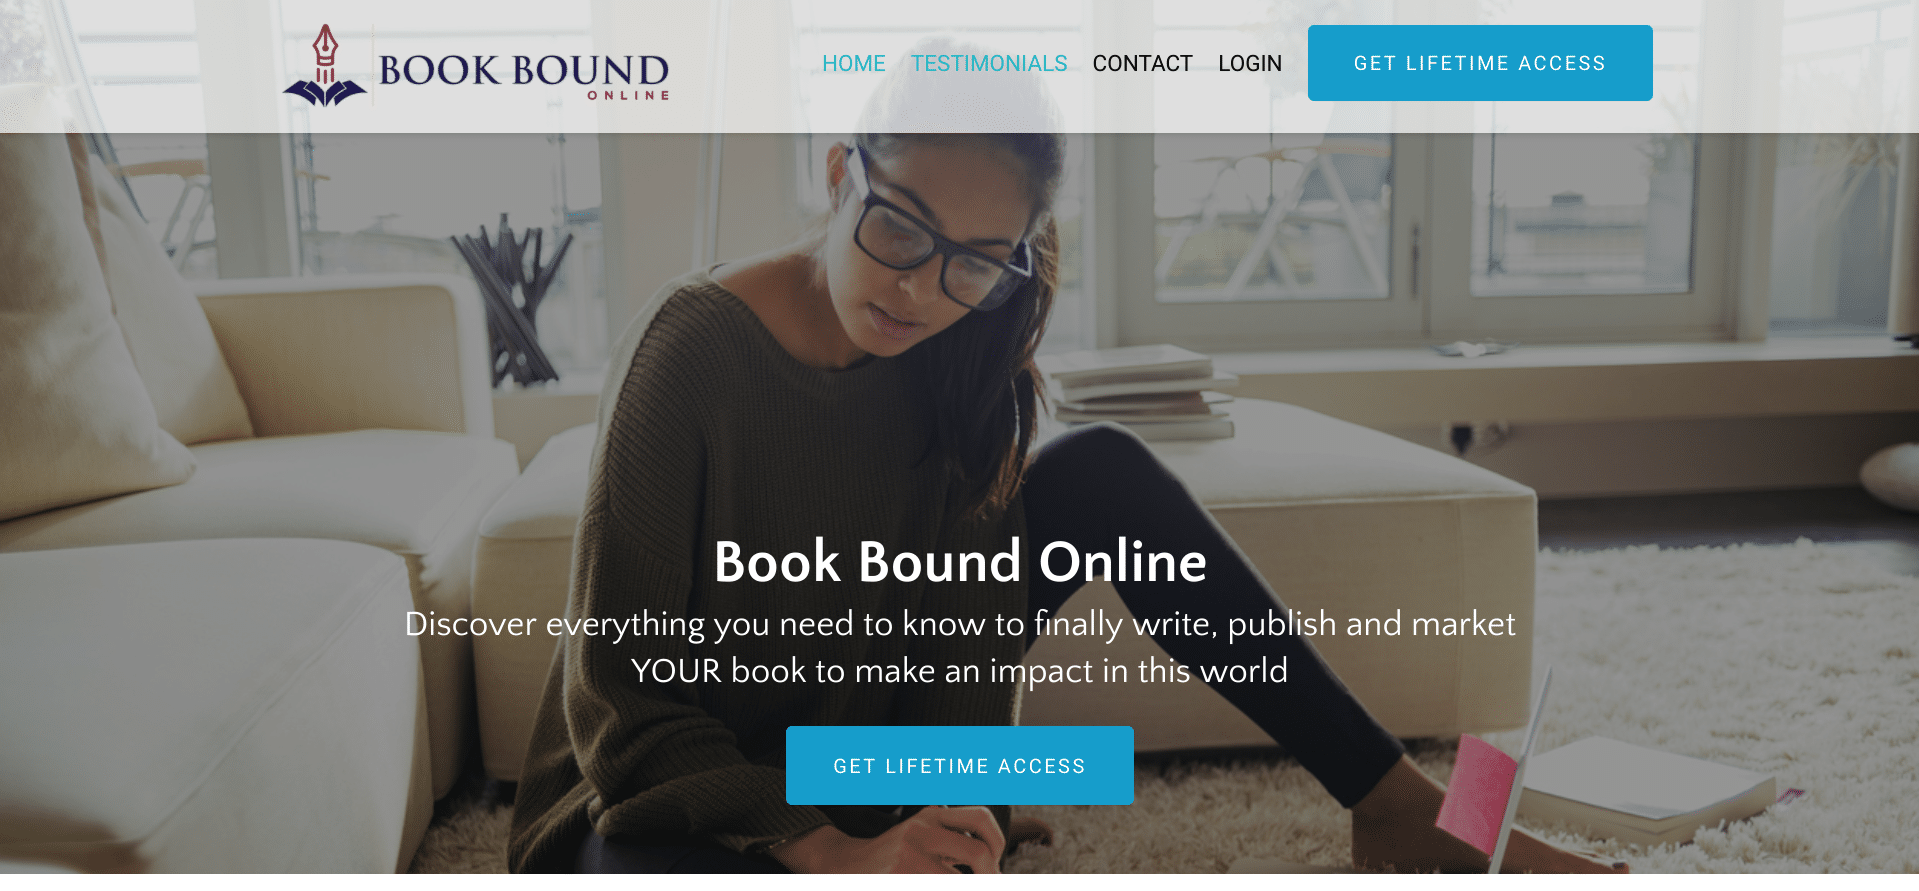 How Book Bound Online is Helping Members Become Published Authors